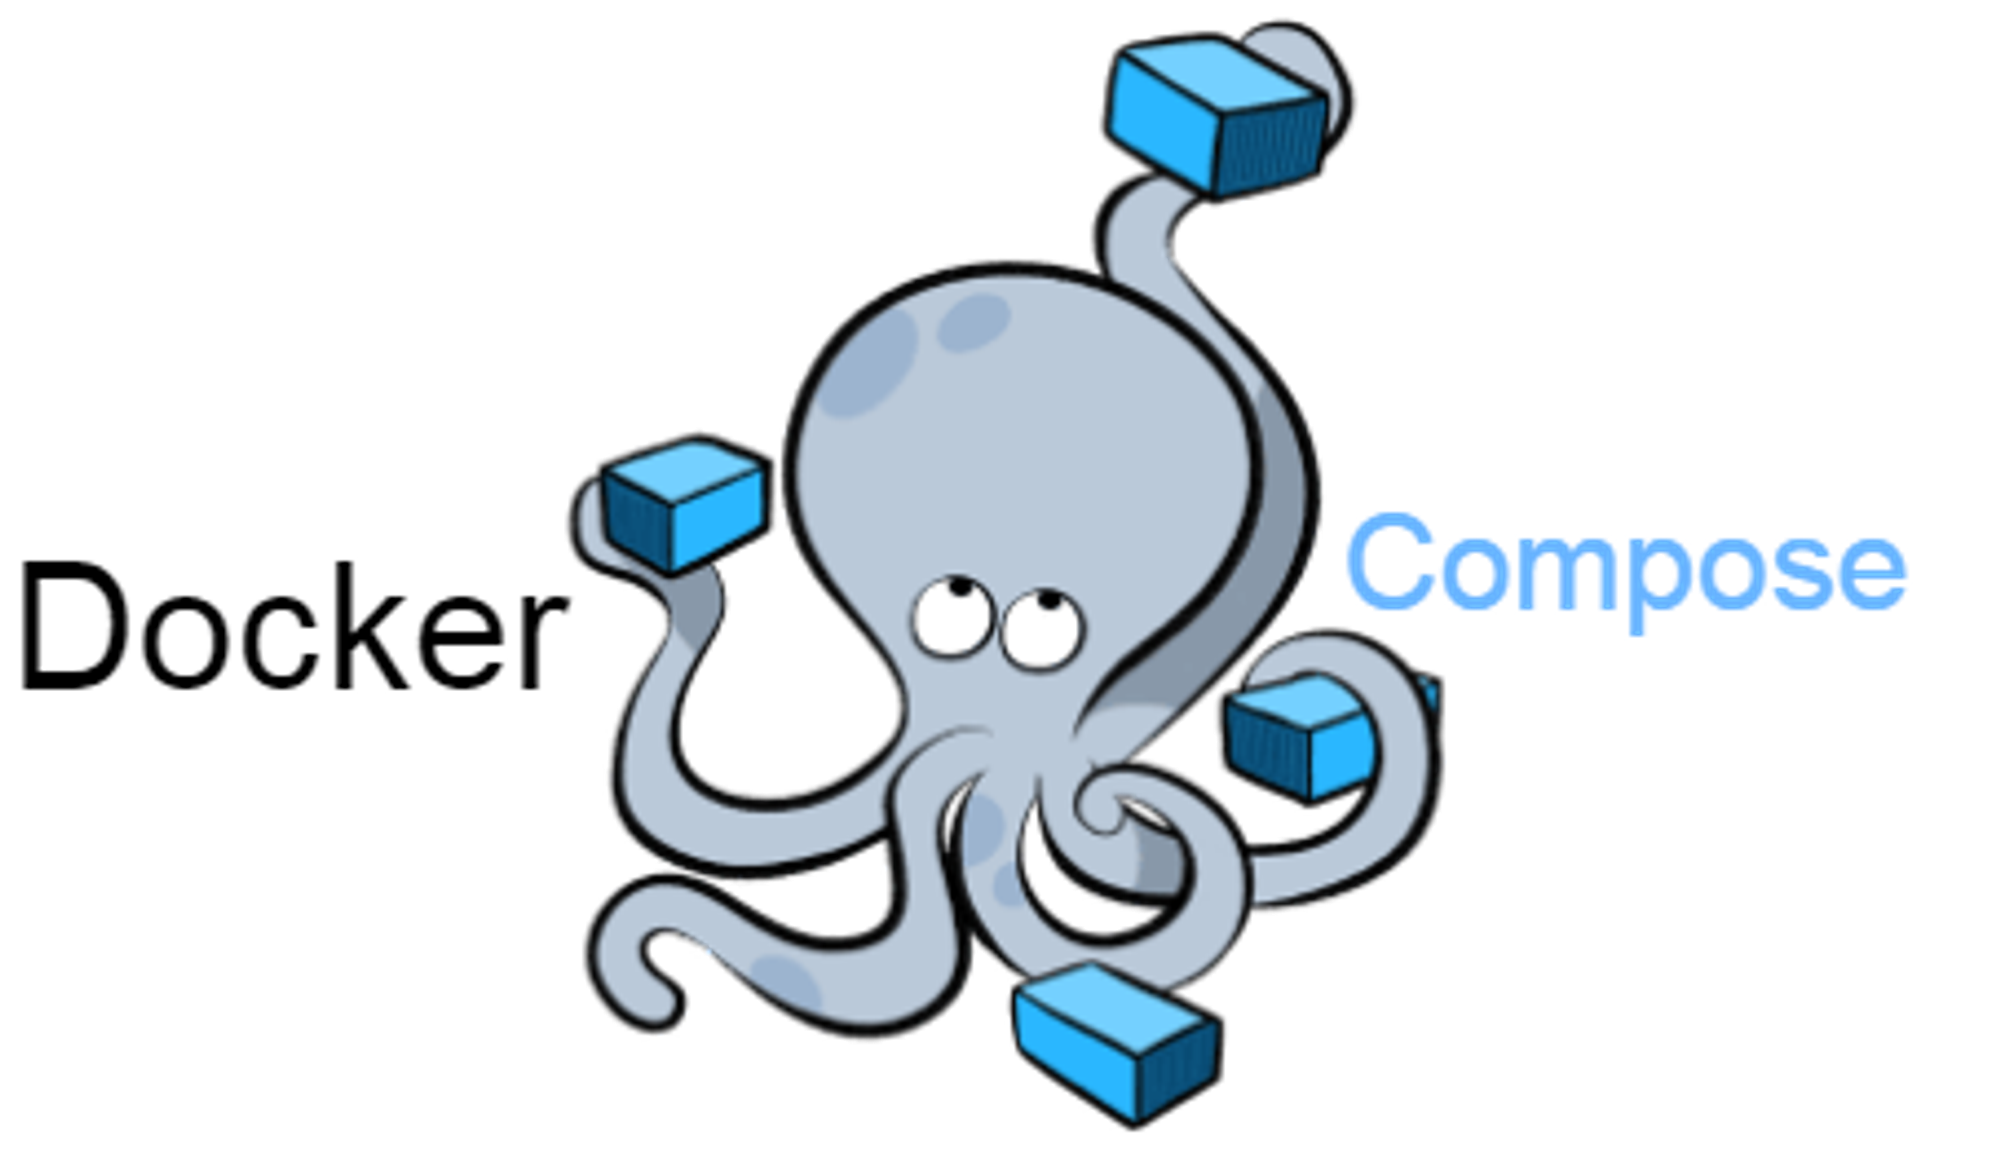 Docker Compose file structure and examples